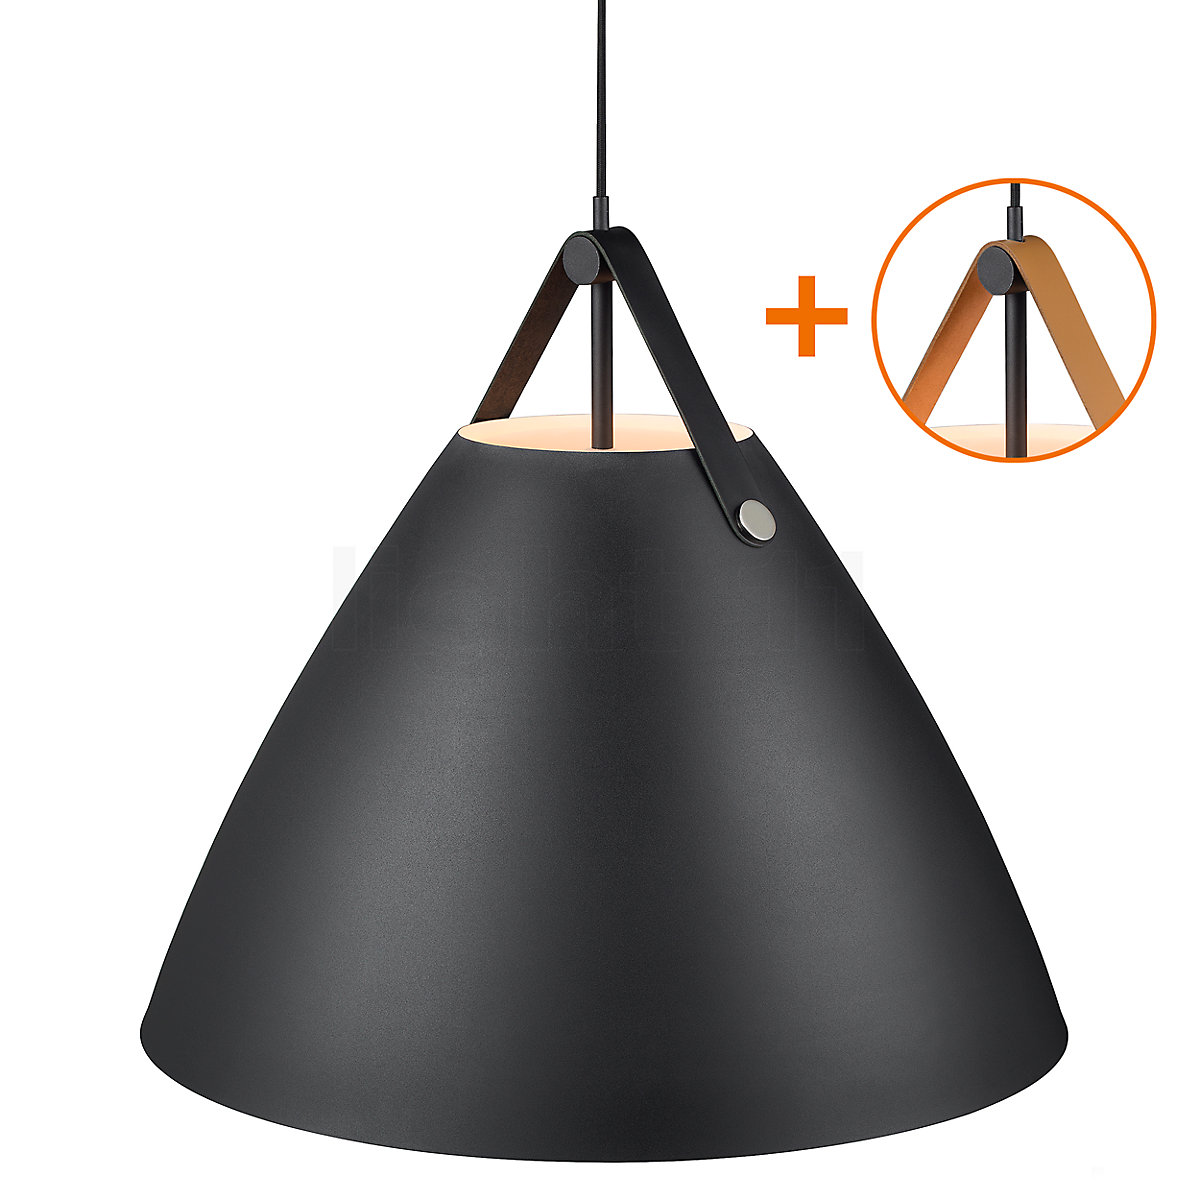 Buy Design for the People Strap Pendant Light at